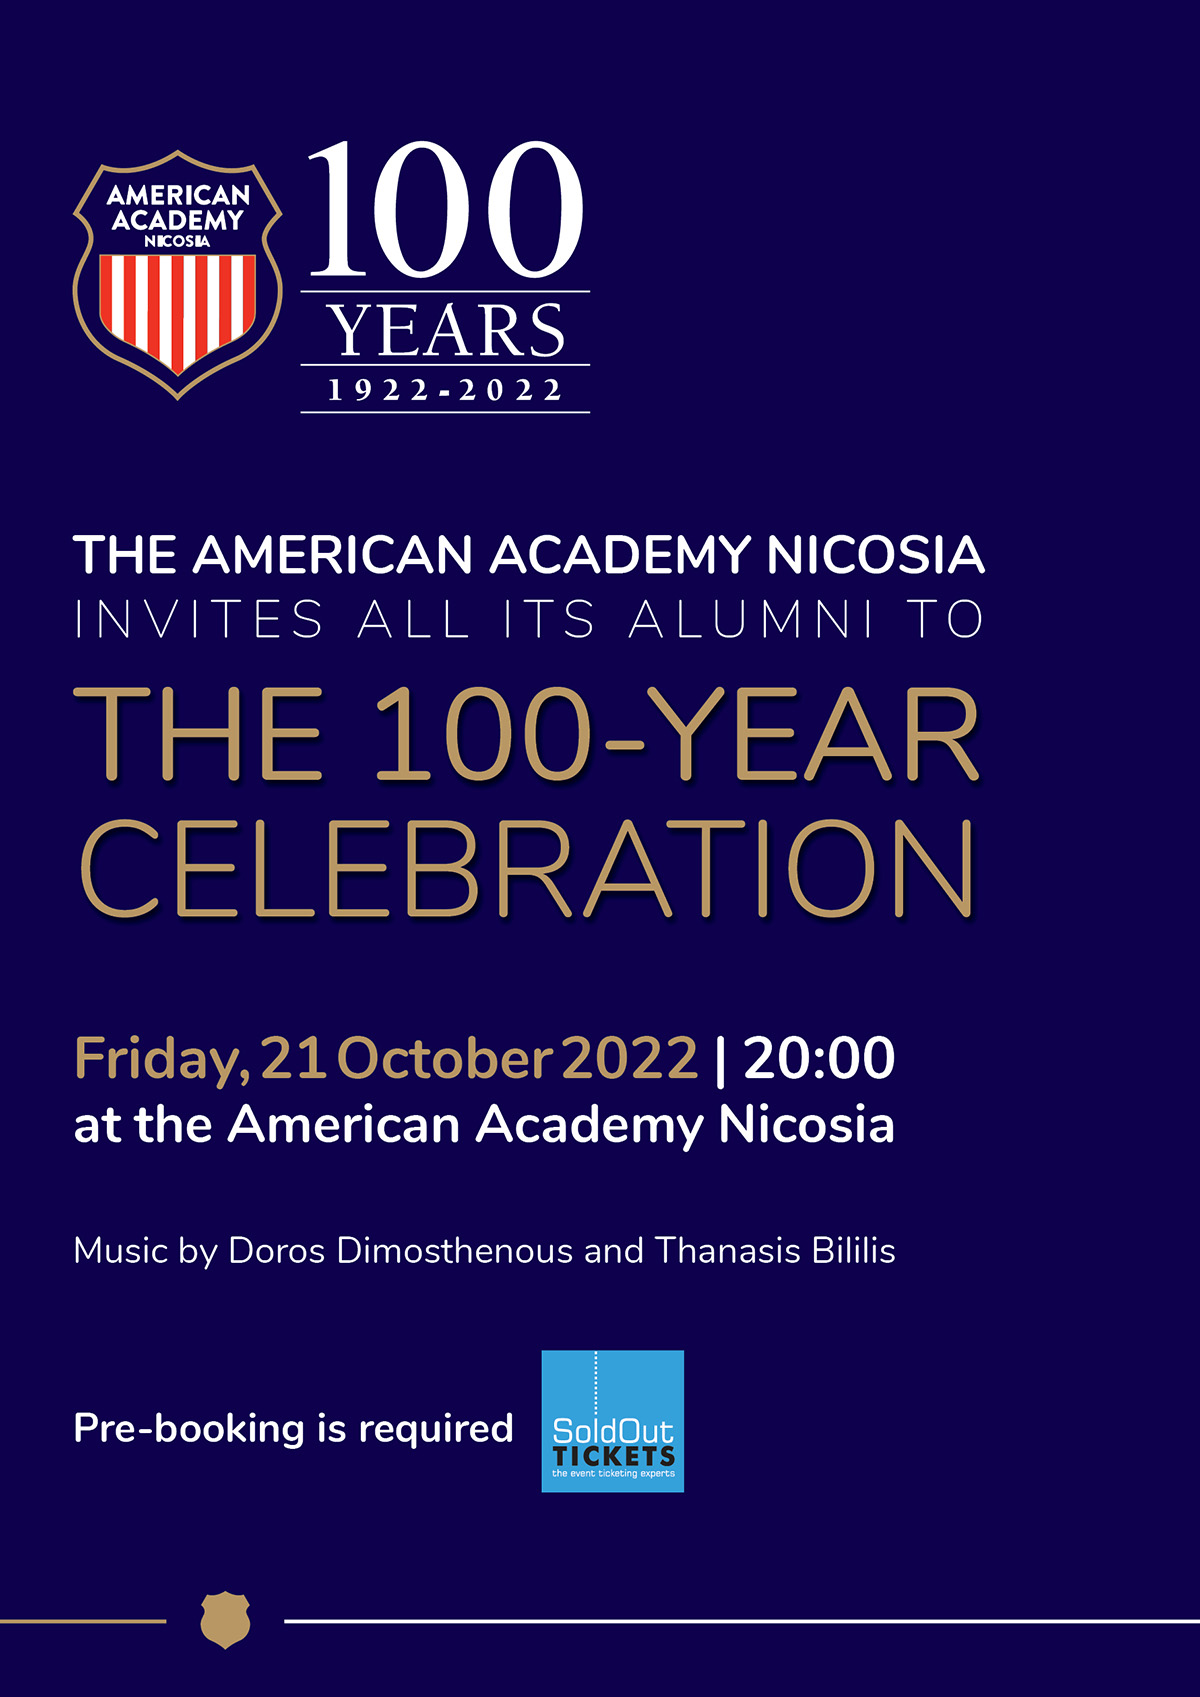 AMERICAN ACADEMY THE 100-YEAR CELEBRATION